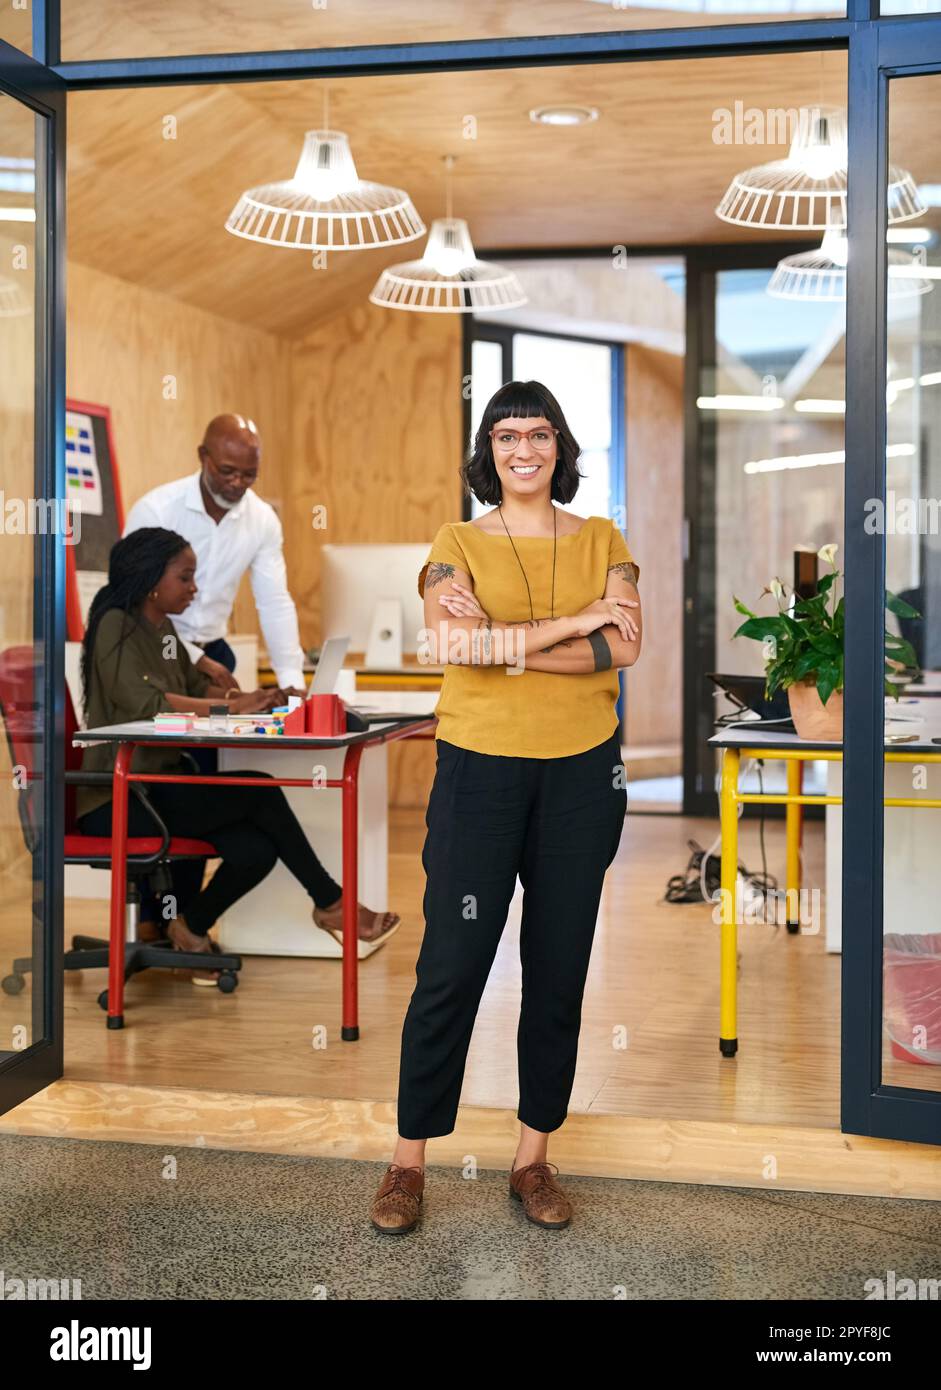 Go after your dreams. a creative businesswoman standing in her office with colleagues blurred in the background. Stock Photo